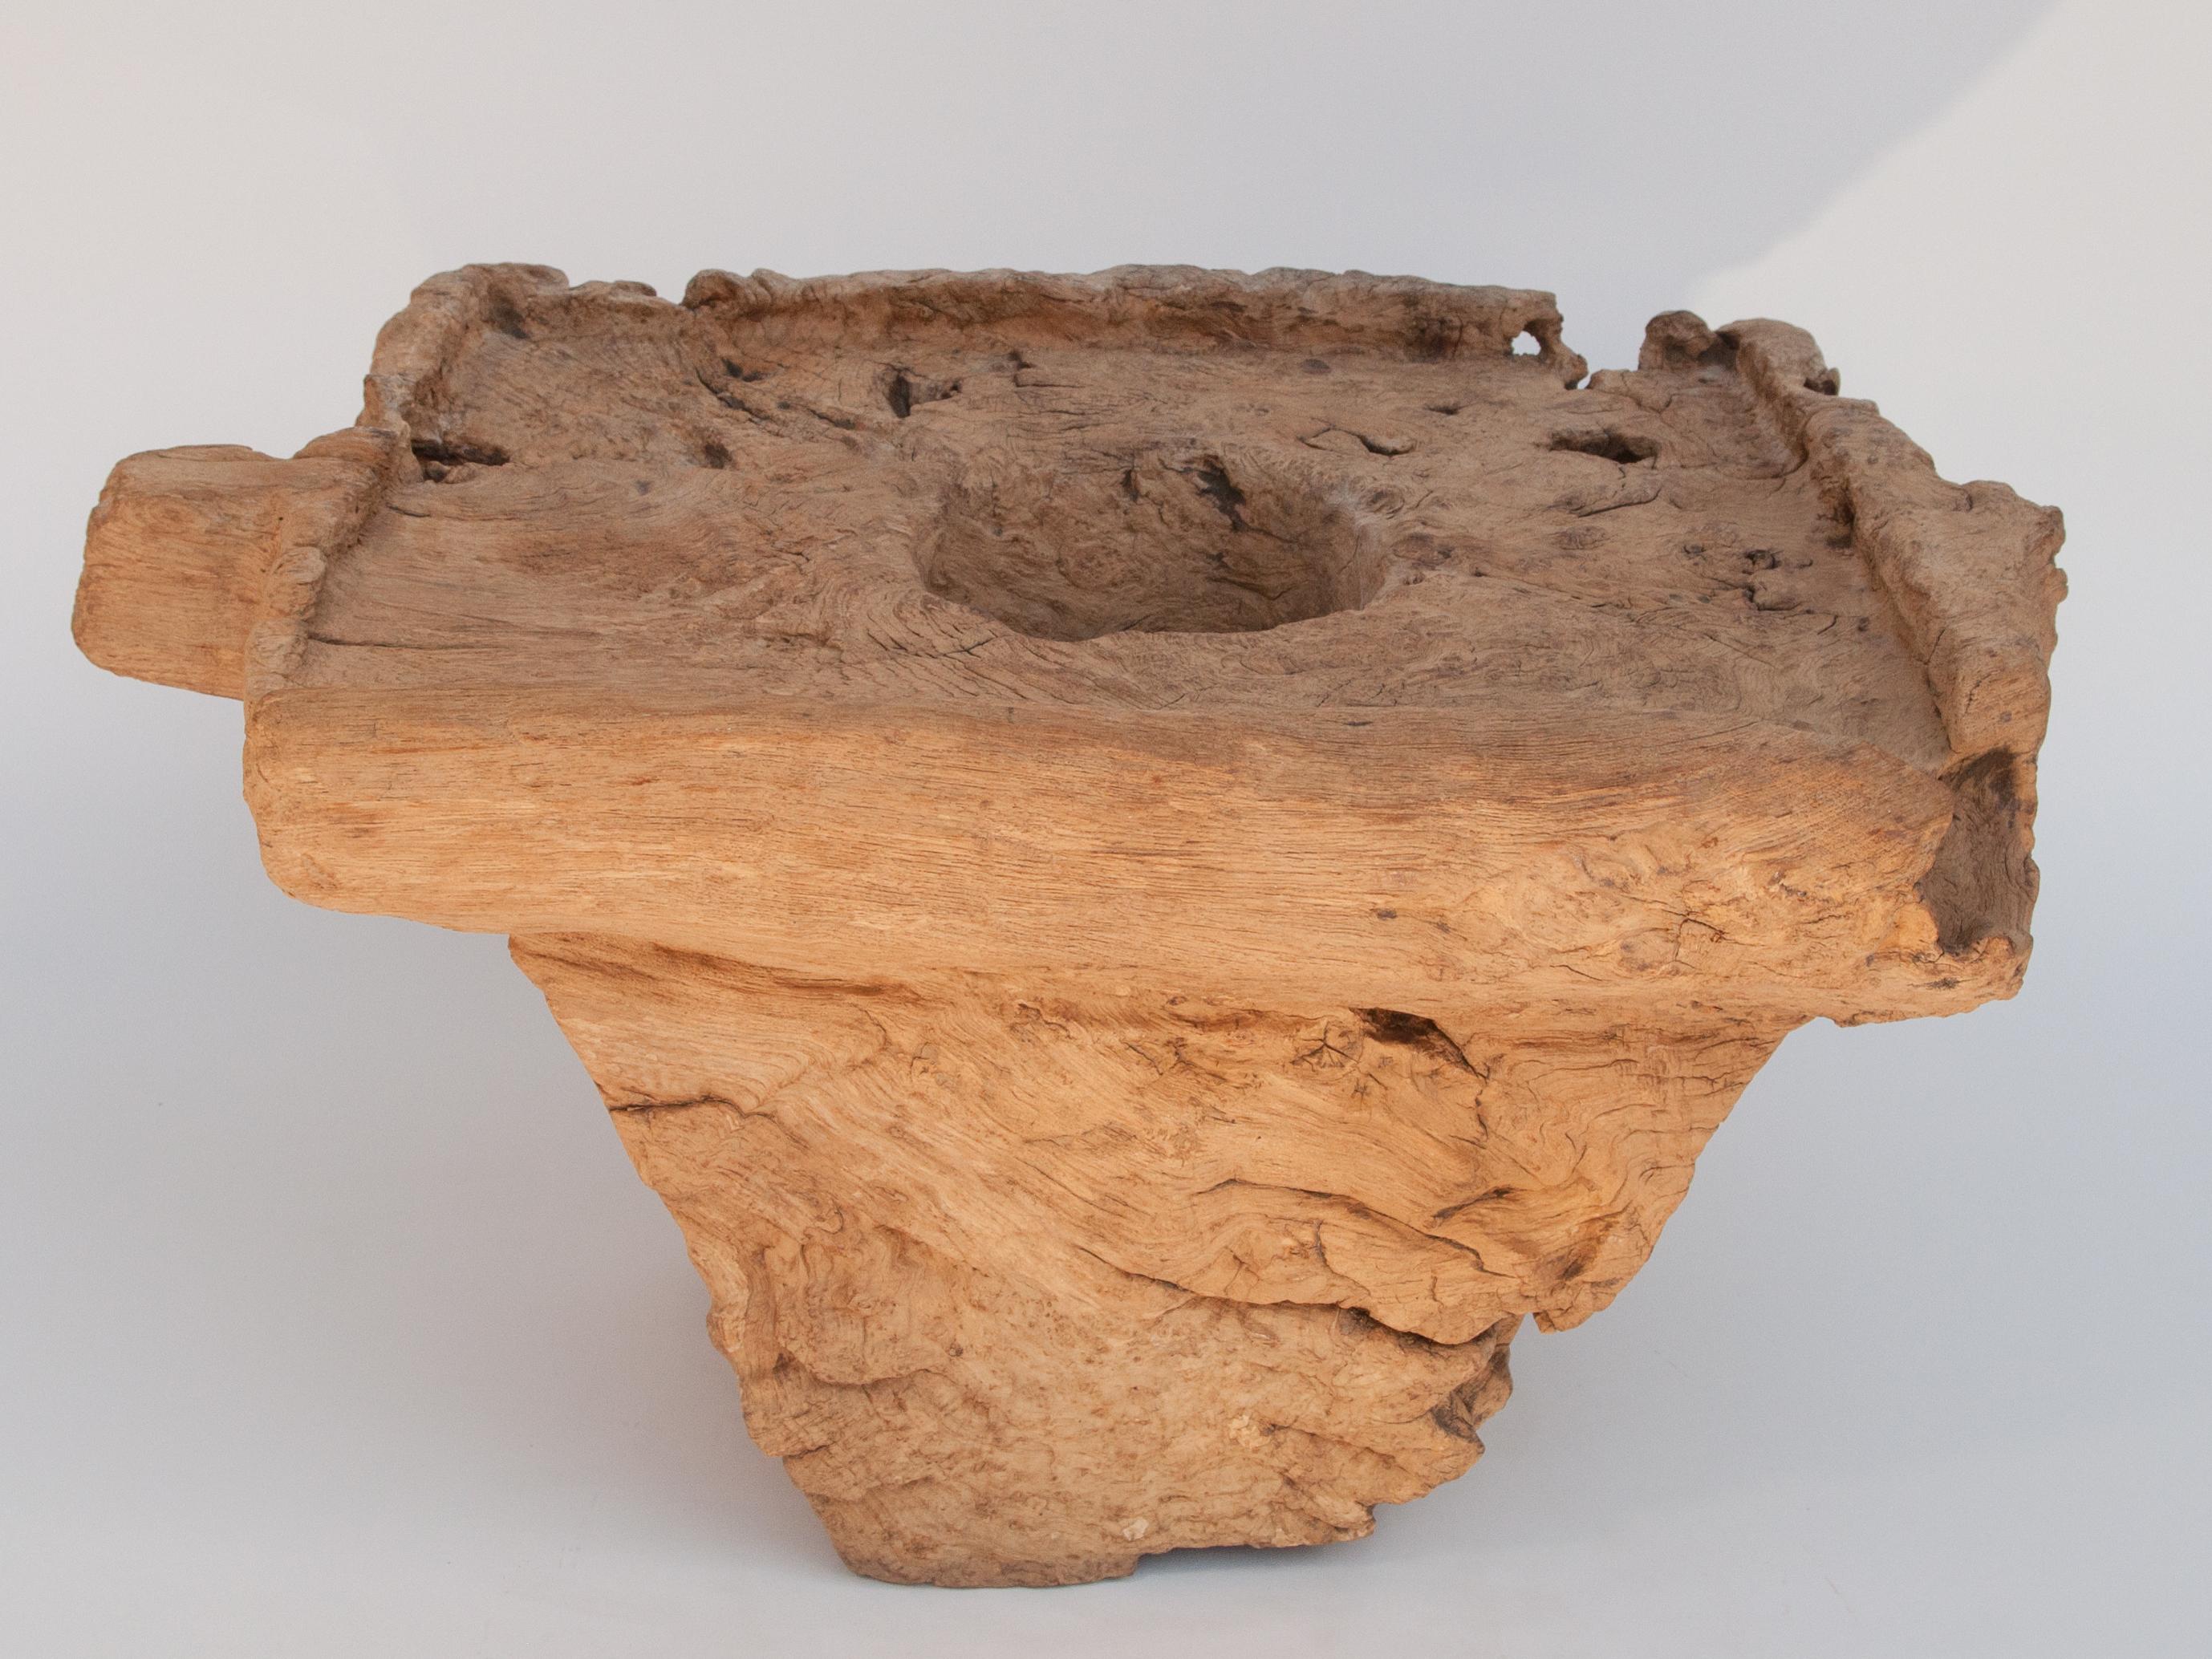 Old Eroded teak burl wood mortar with handle, North Thailand, mid-20th century.
This rustic mortar comes from rural northern Thailand where in its time it would have been used, together with a heavy wooden pounder, on an almost daily basis. This